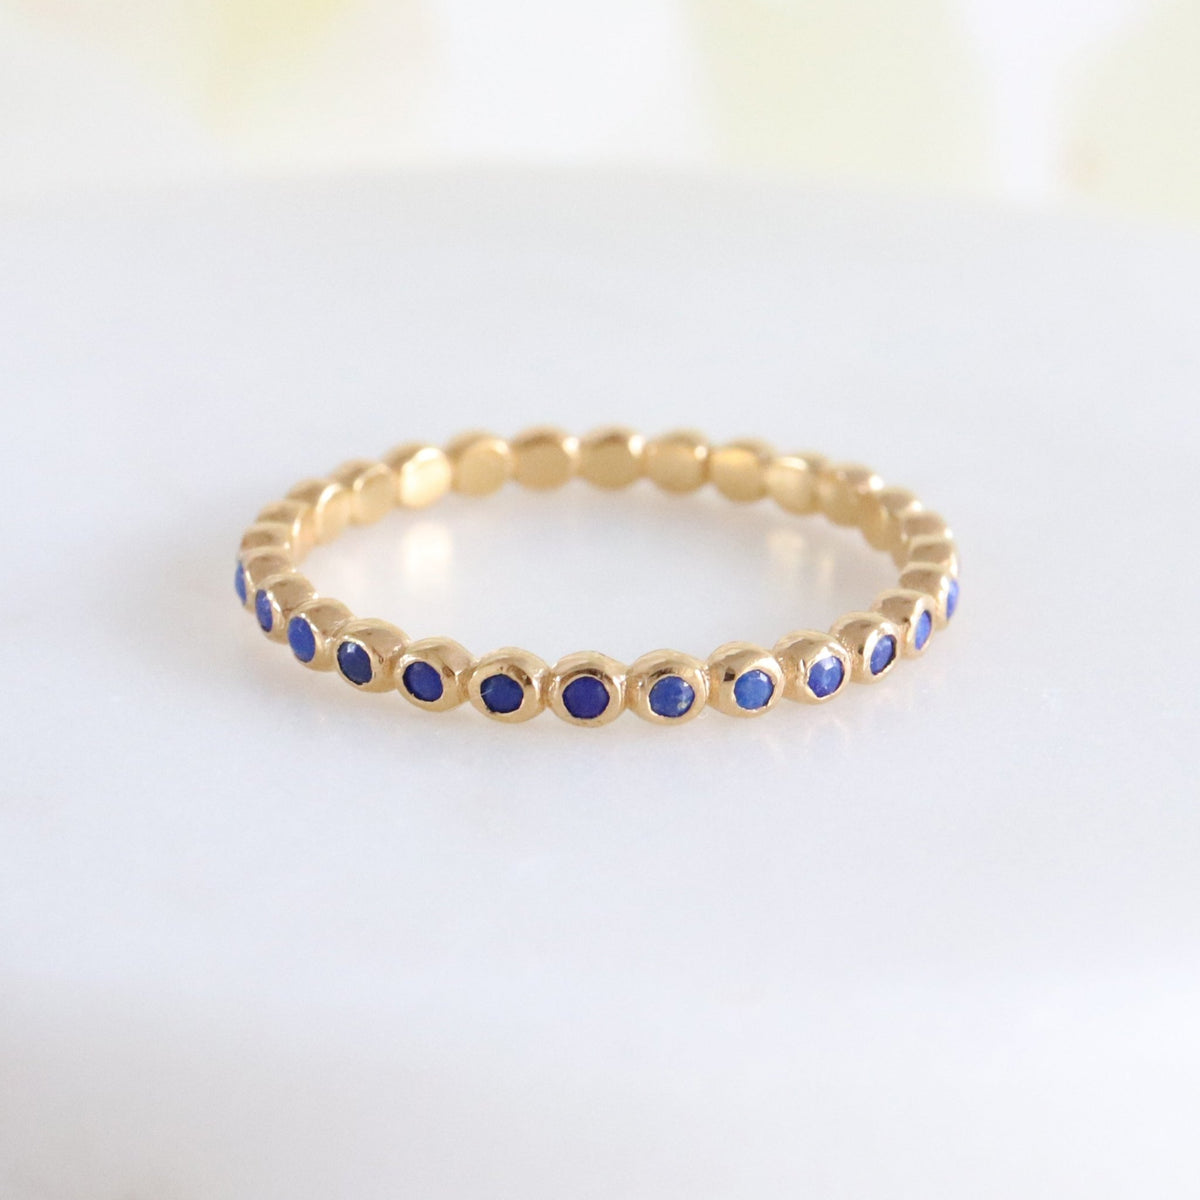 LOVE THIN DISK BAND RING - LAPIS &amp; GOLD - SO PRETTY CARA COTTER